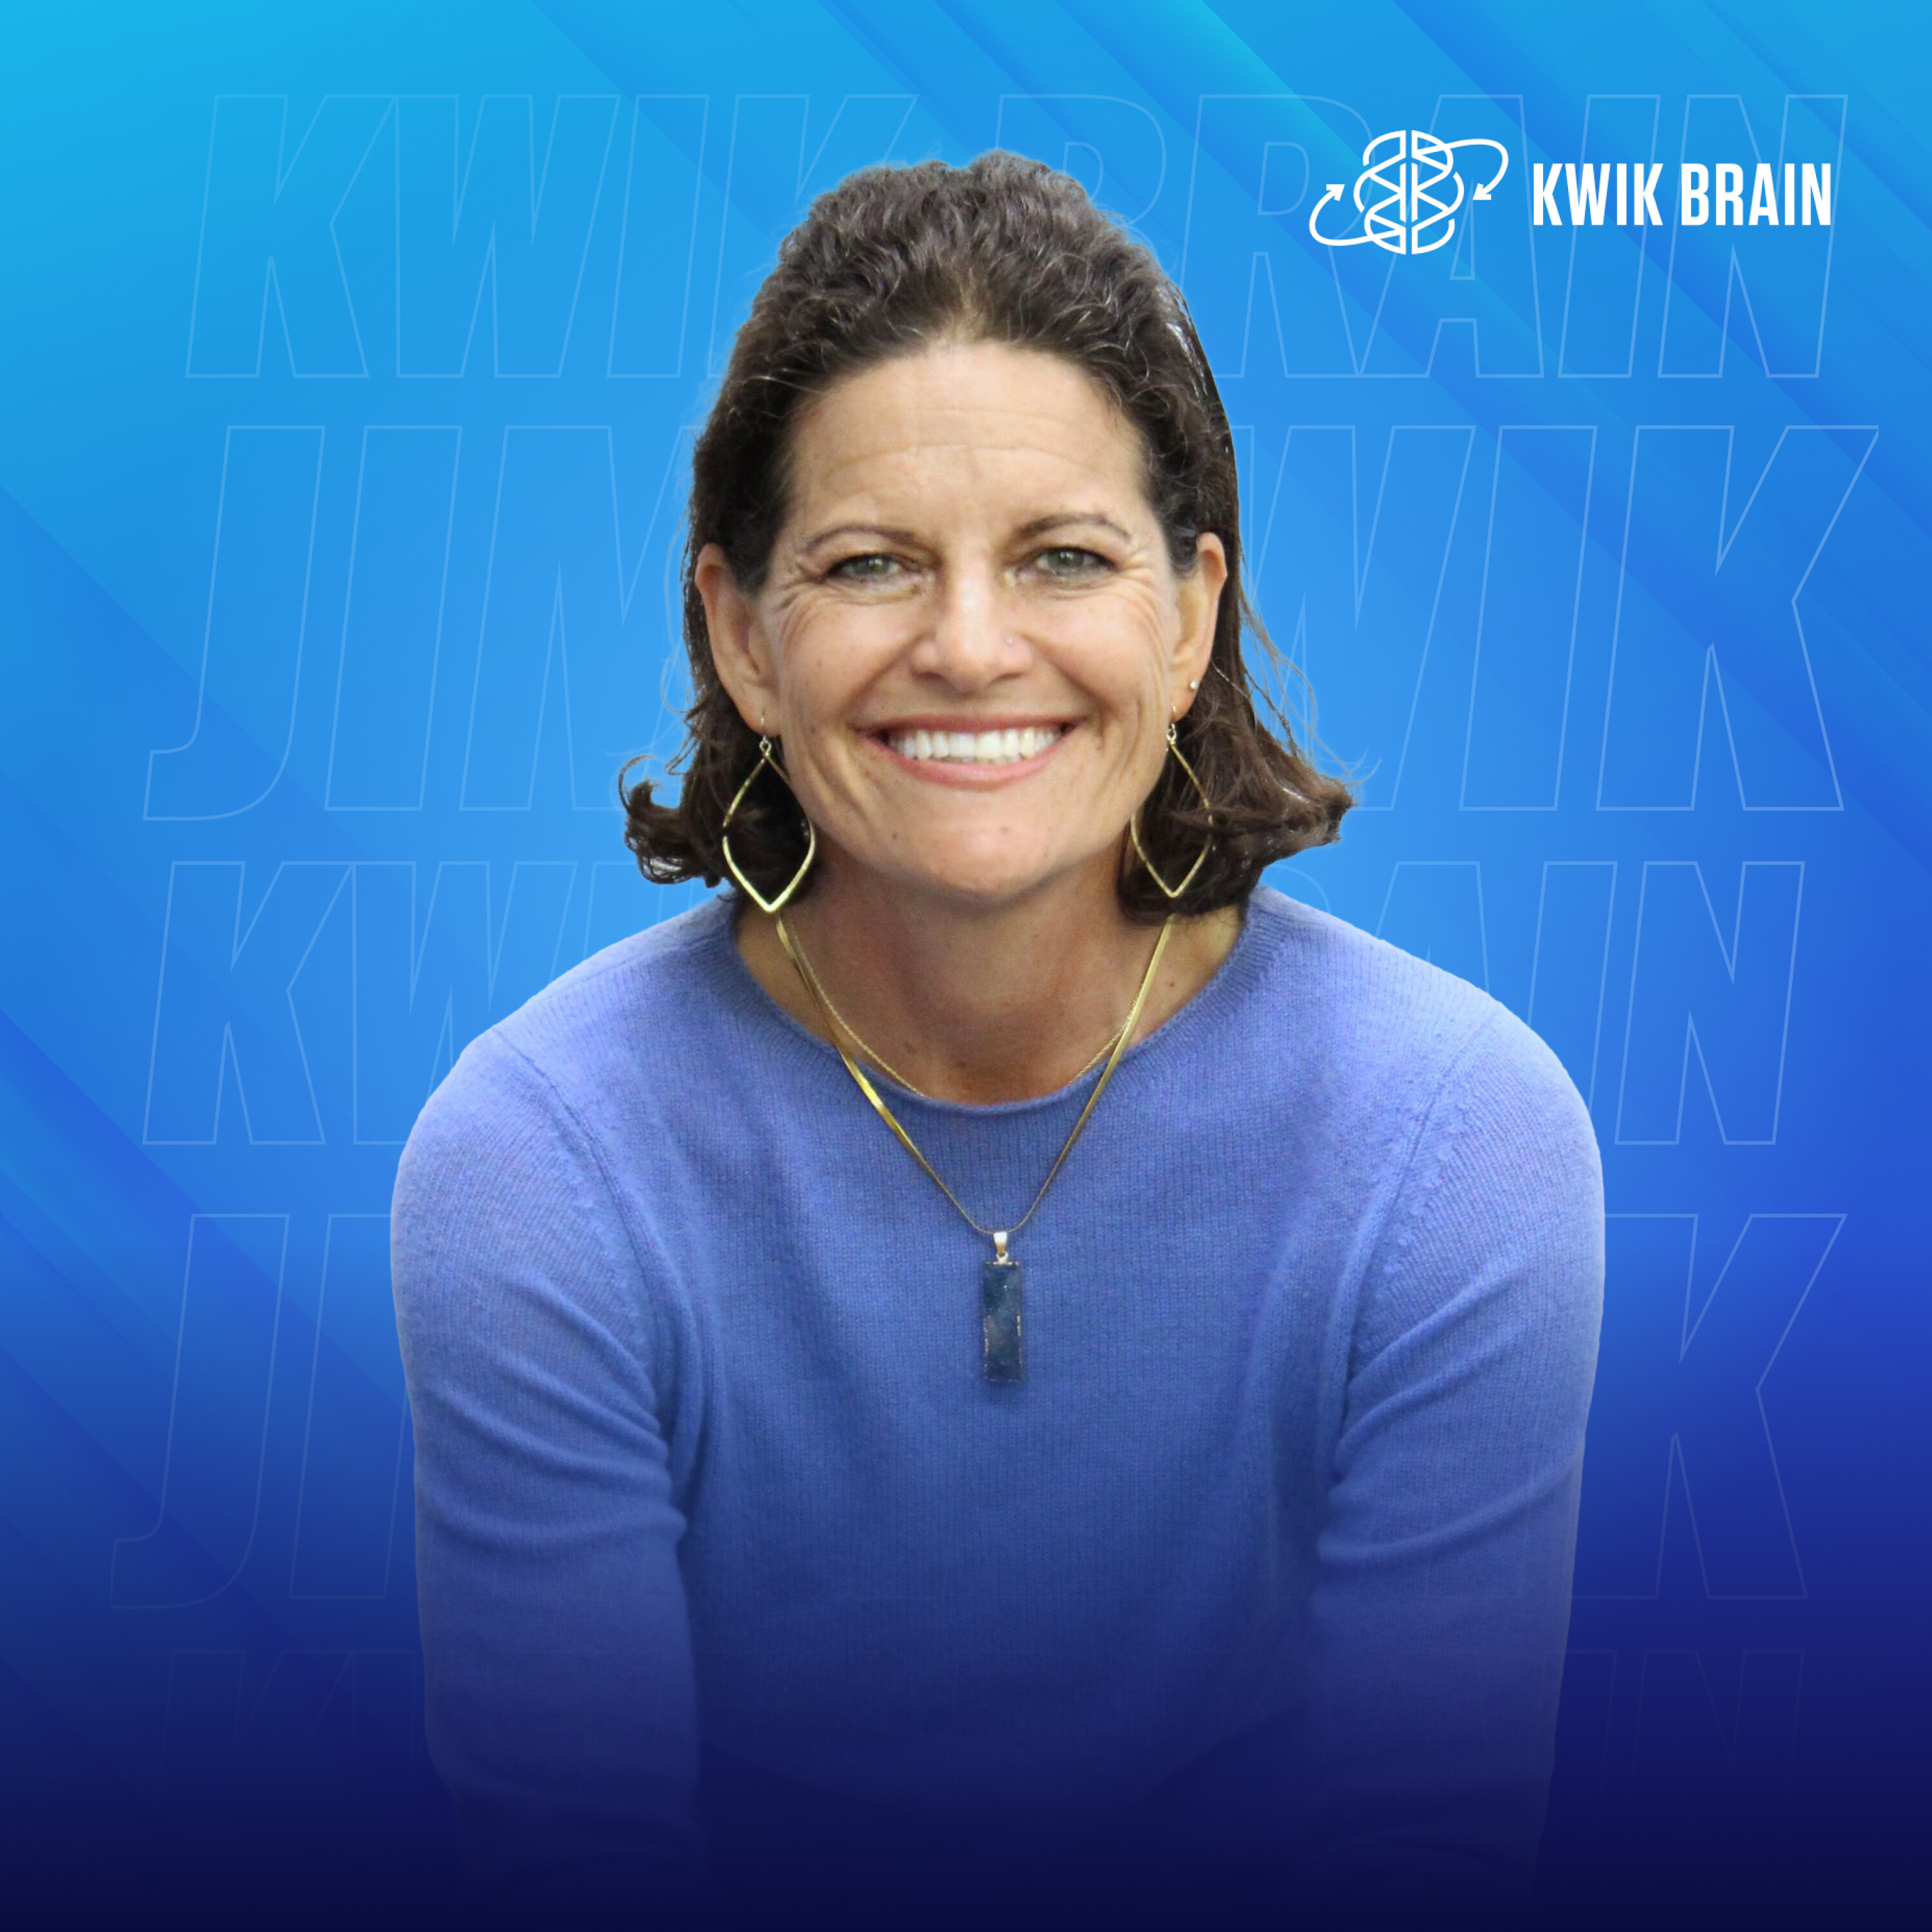 Strategies for Balanced Hormones, Cycles and Brain with Dr. Mindy Pelz